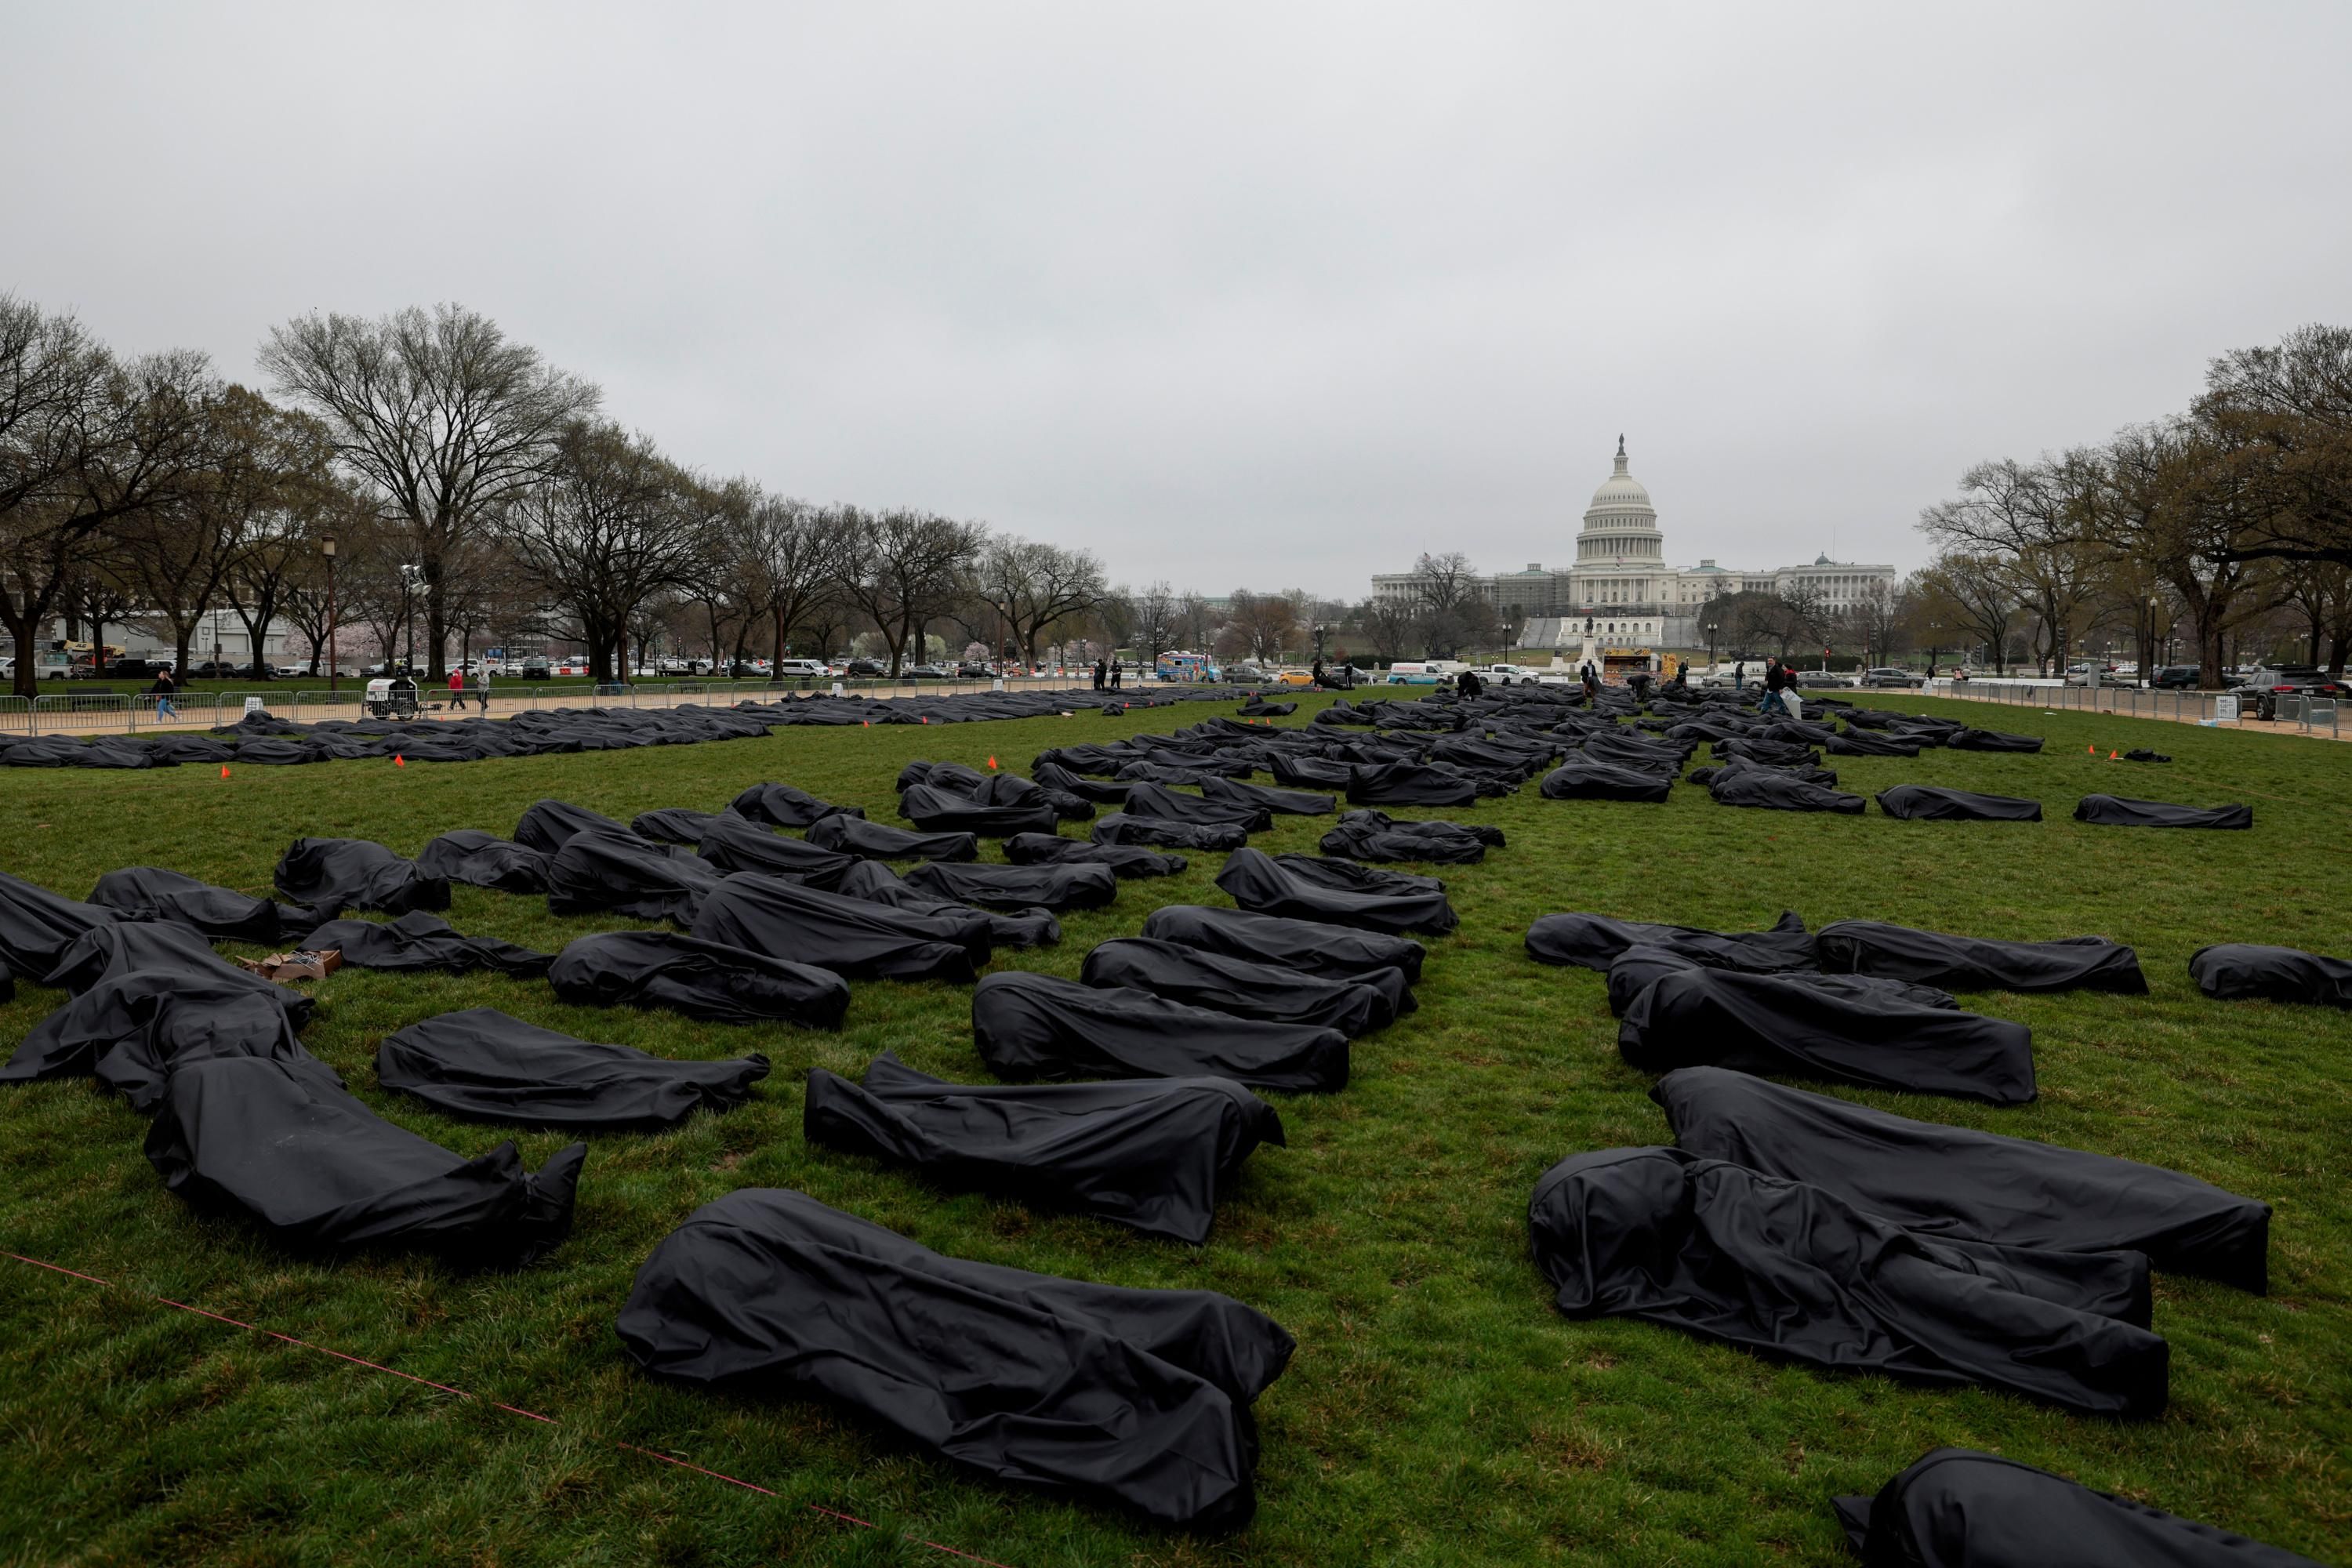 Gun control advocates spell "Thoughts and Prayers" with body bags on Capitol Hill